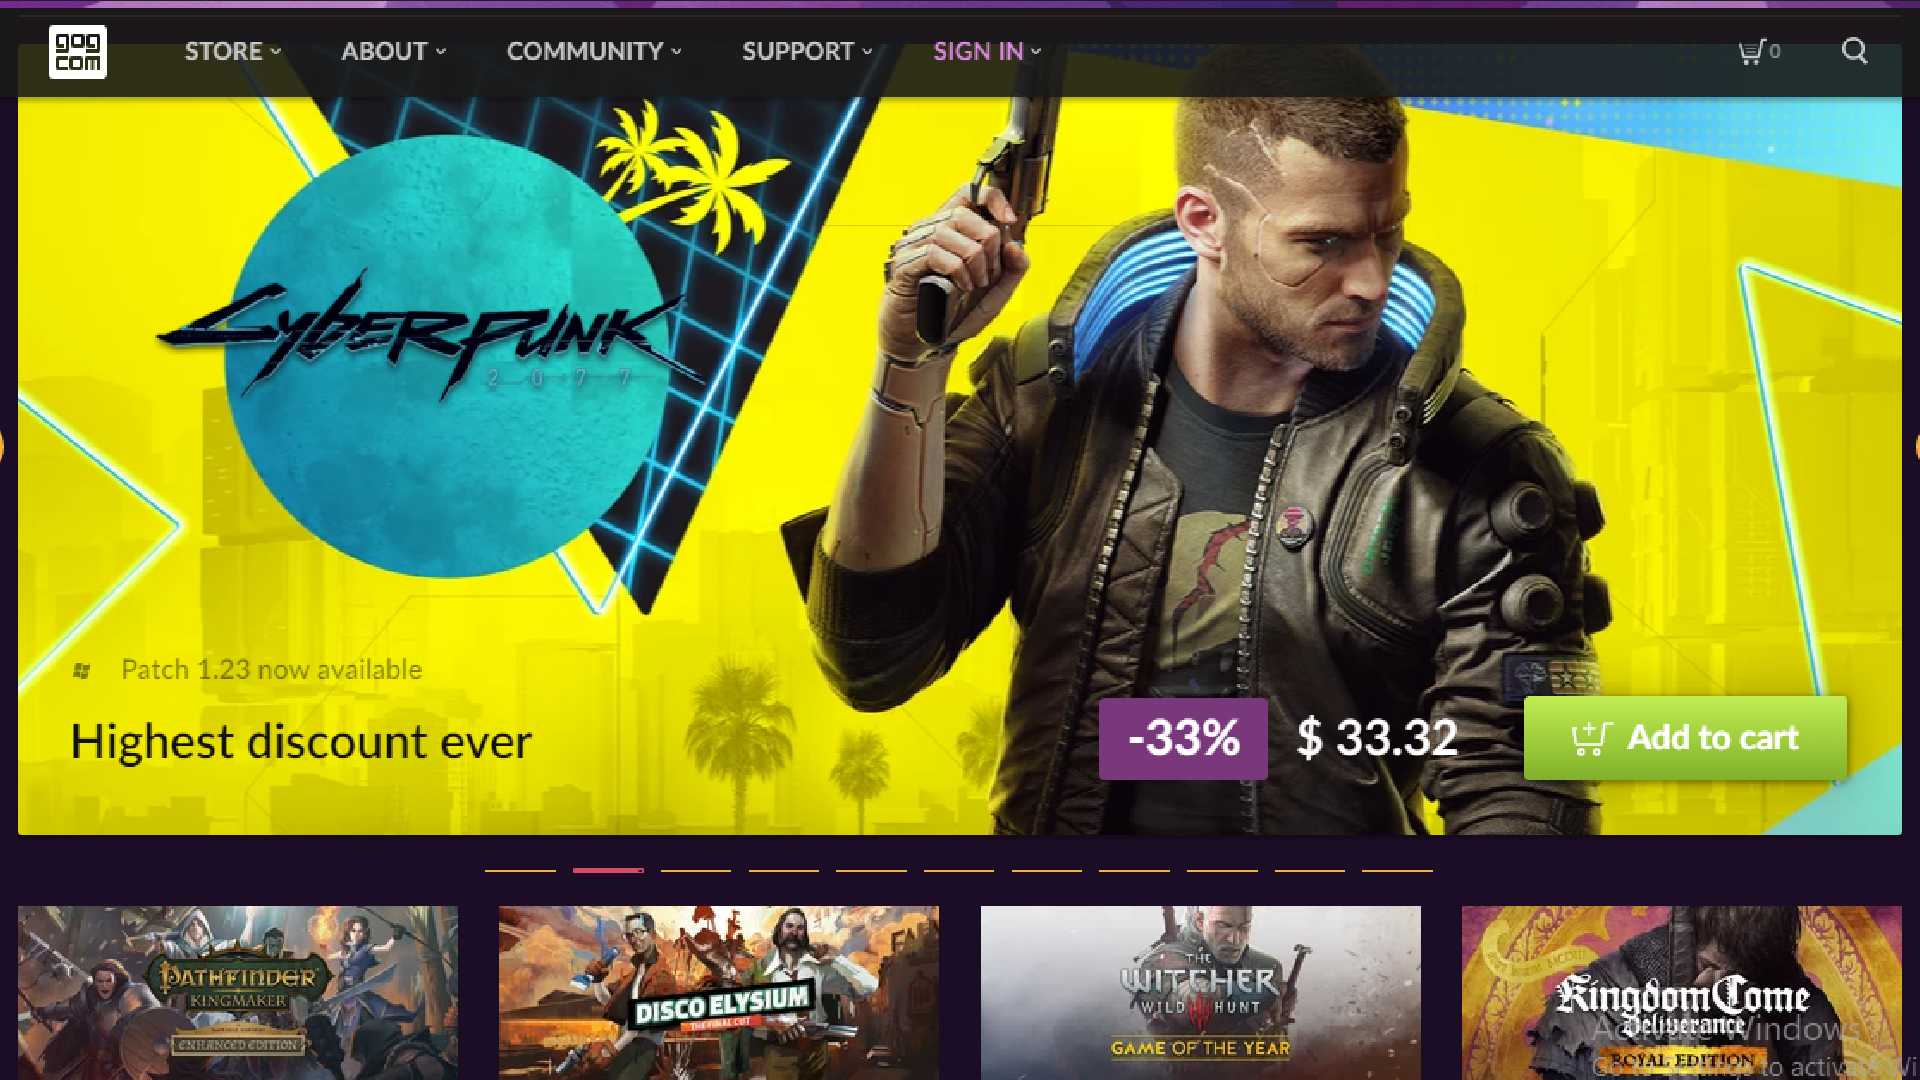 Steam Gaming Store Official Partner: Buy Steam Games at Cheapest Prices